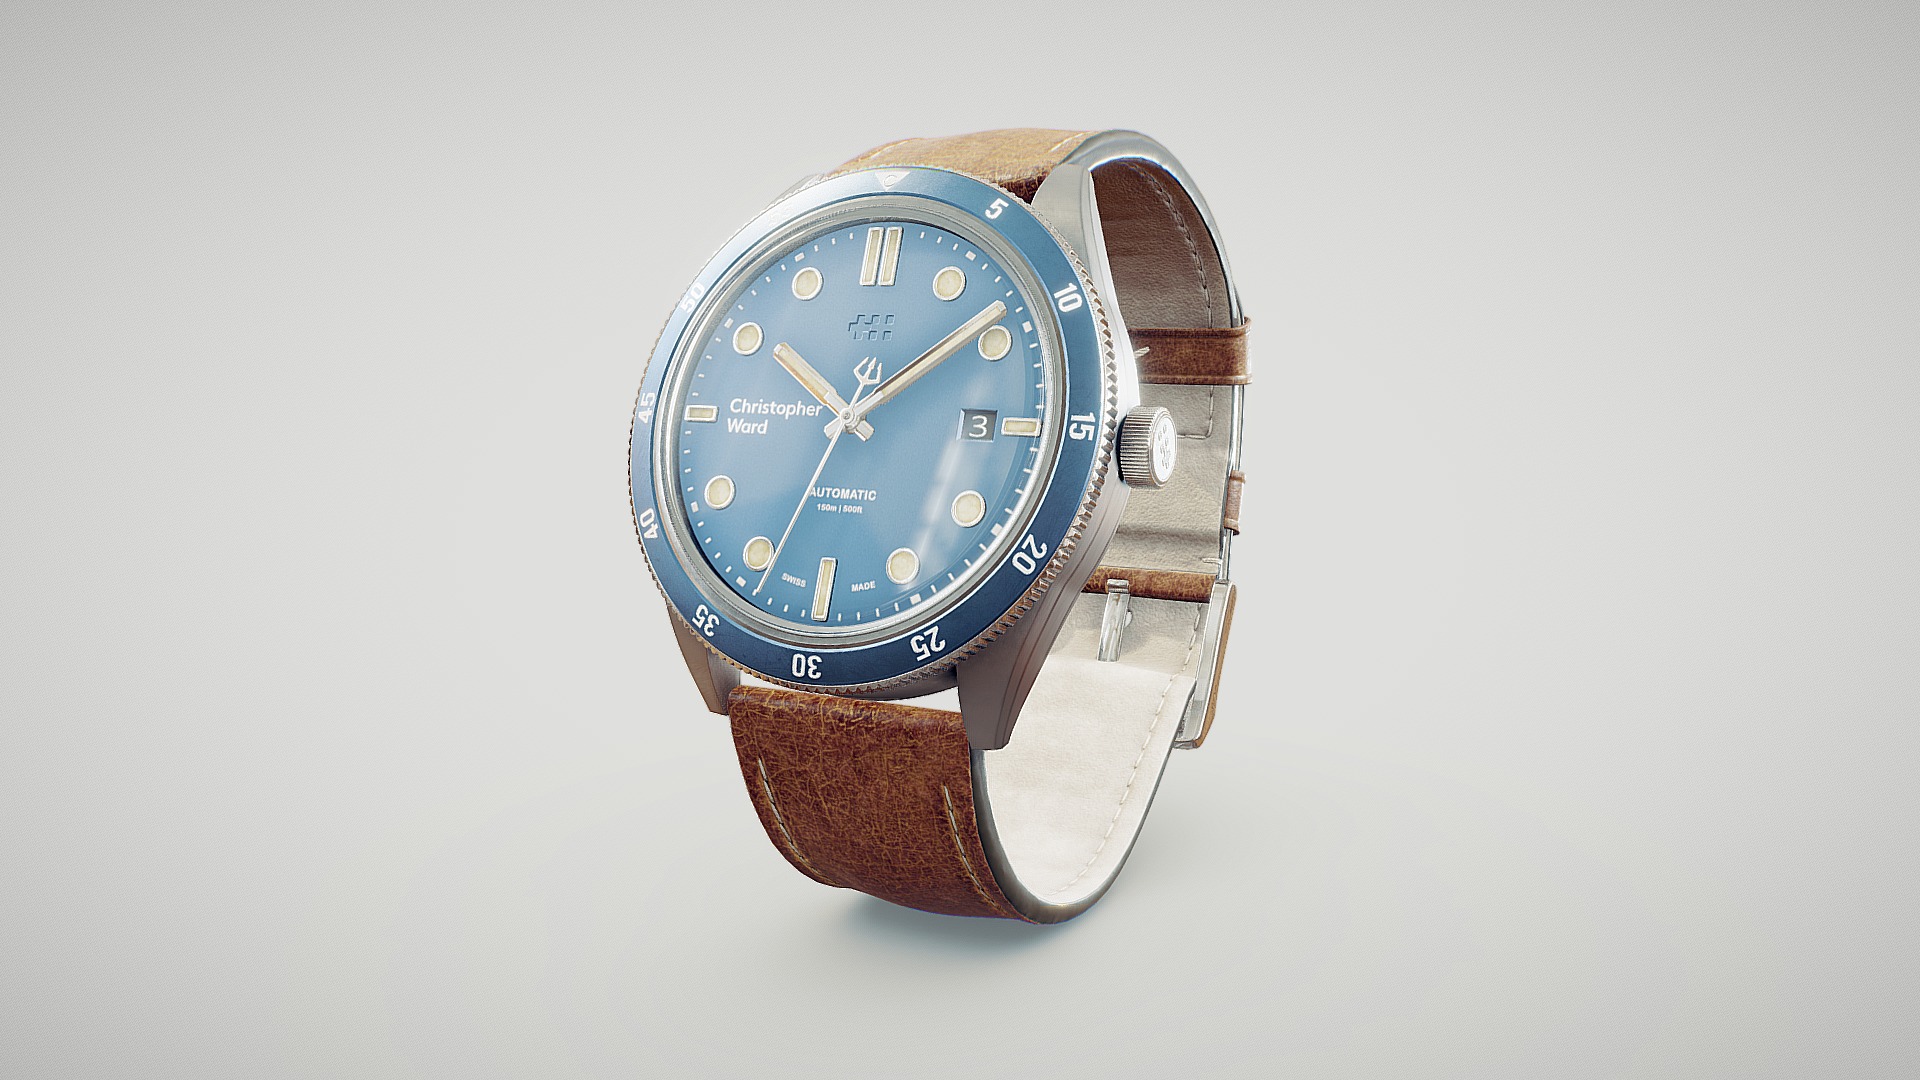 3D model Christopher Ward C65 Watch - This is a 3D model of the Christopher Ward C65 Watch. The 3D model is about a watch on a white surface.